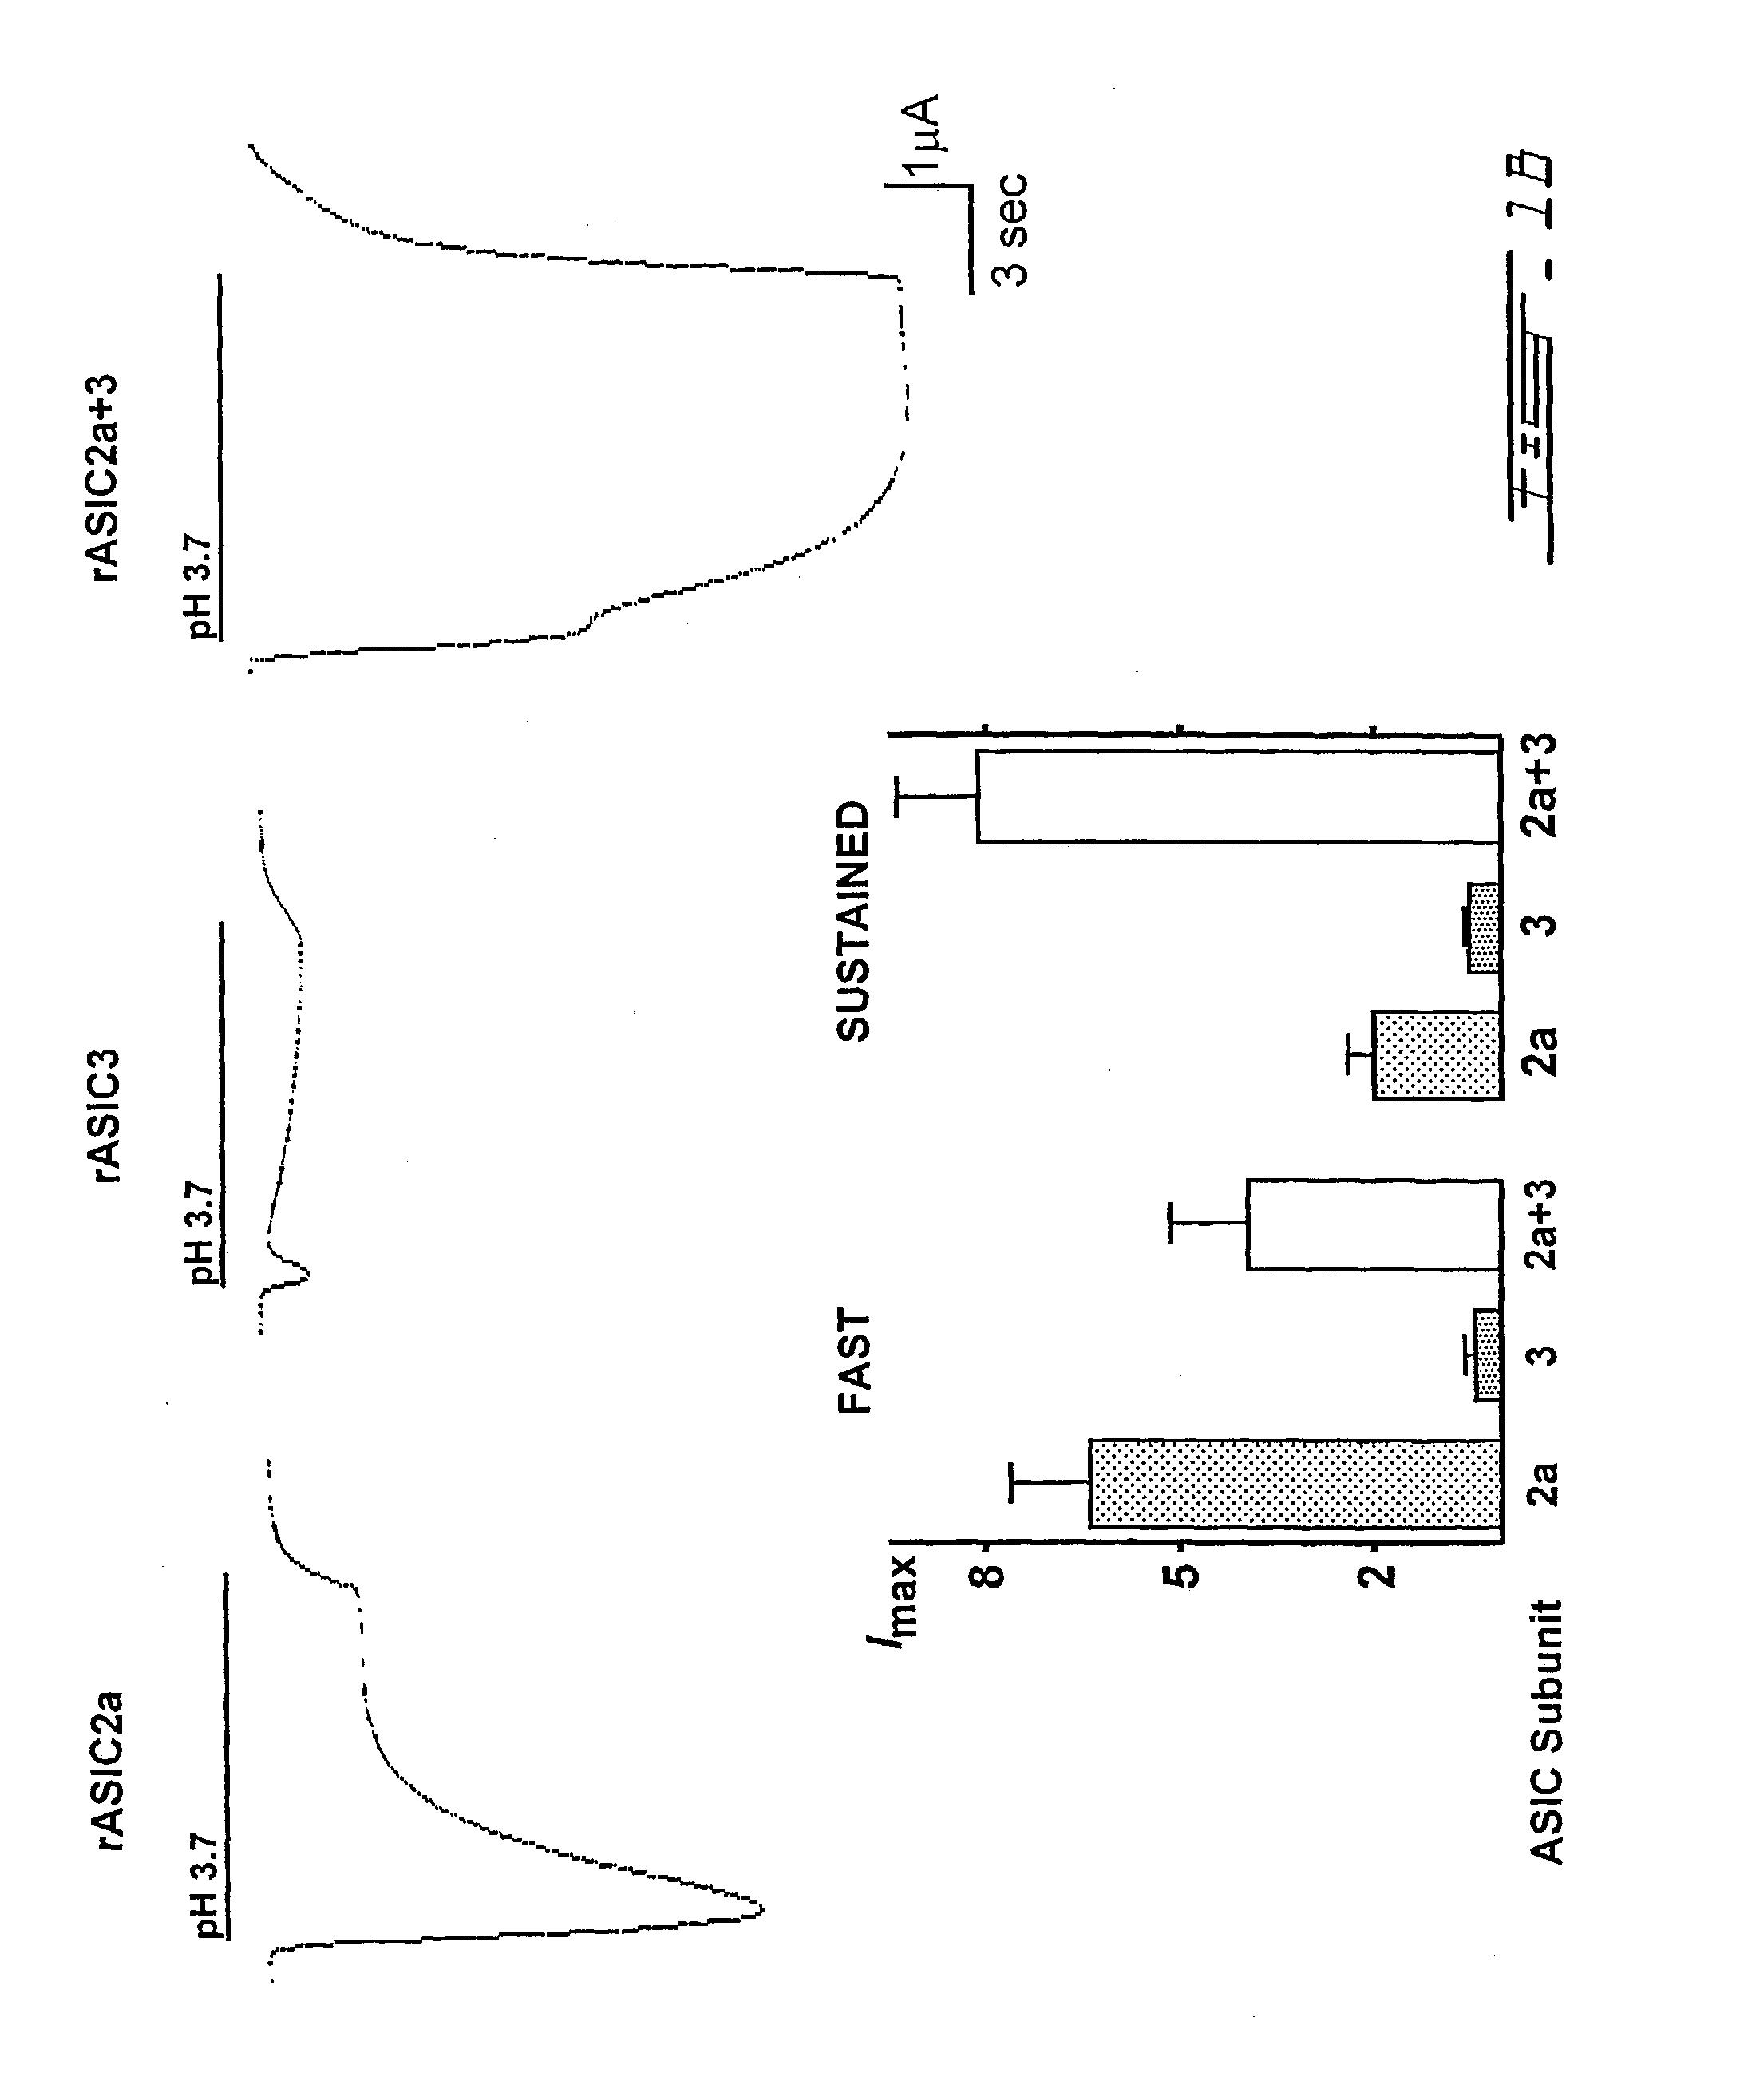 Novel heteromultimeric ion channel receptor and uses thereof